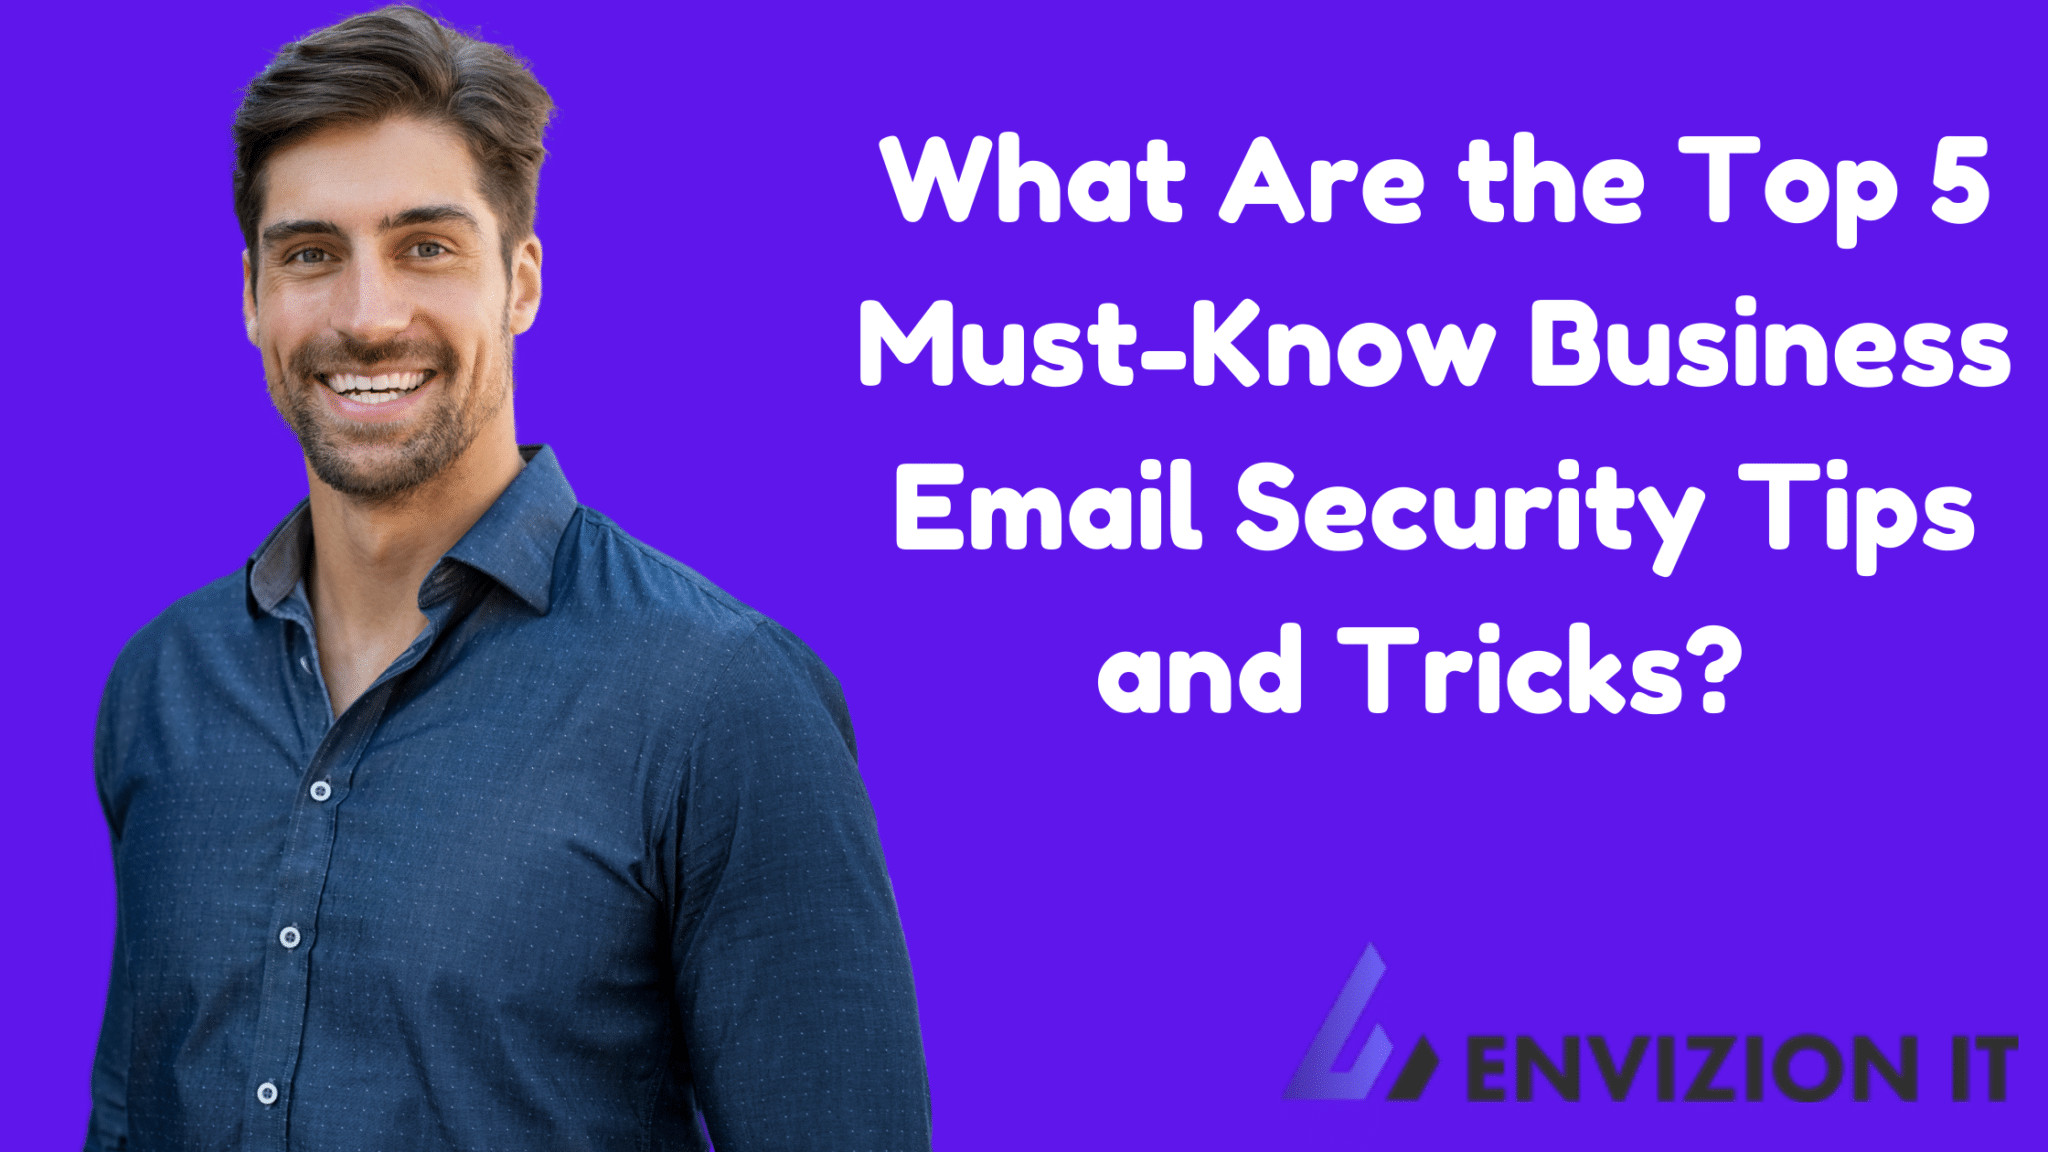 What Are the Top 5 Must-Know Business Email Security Tips and Tricks